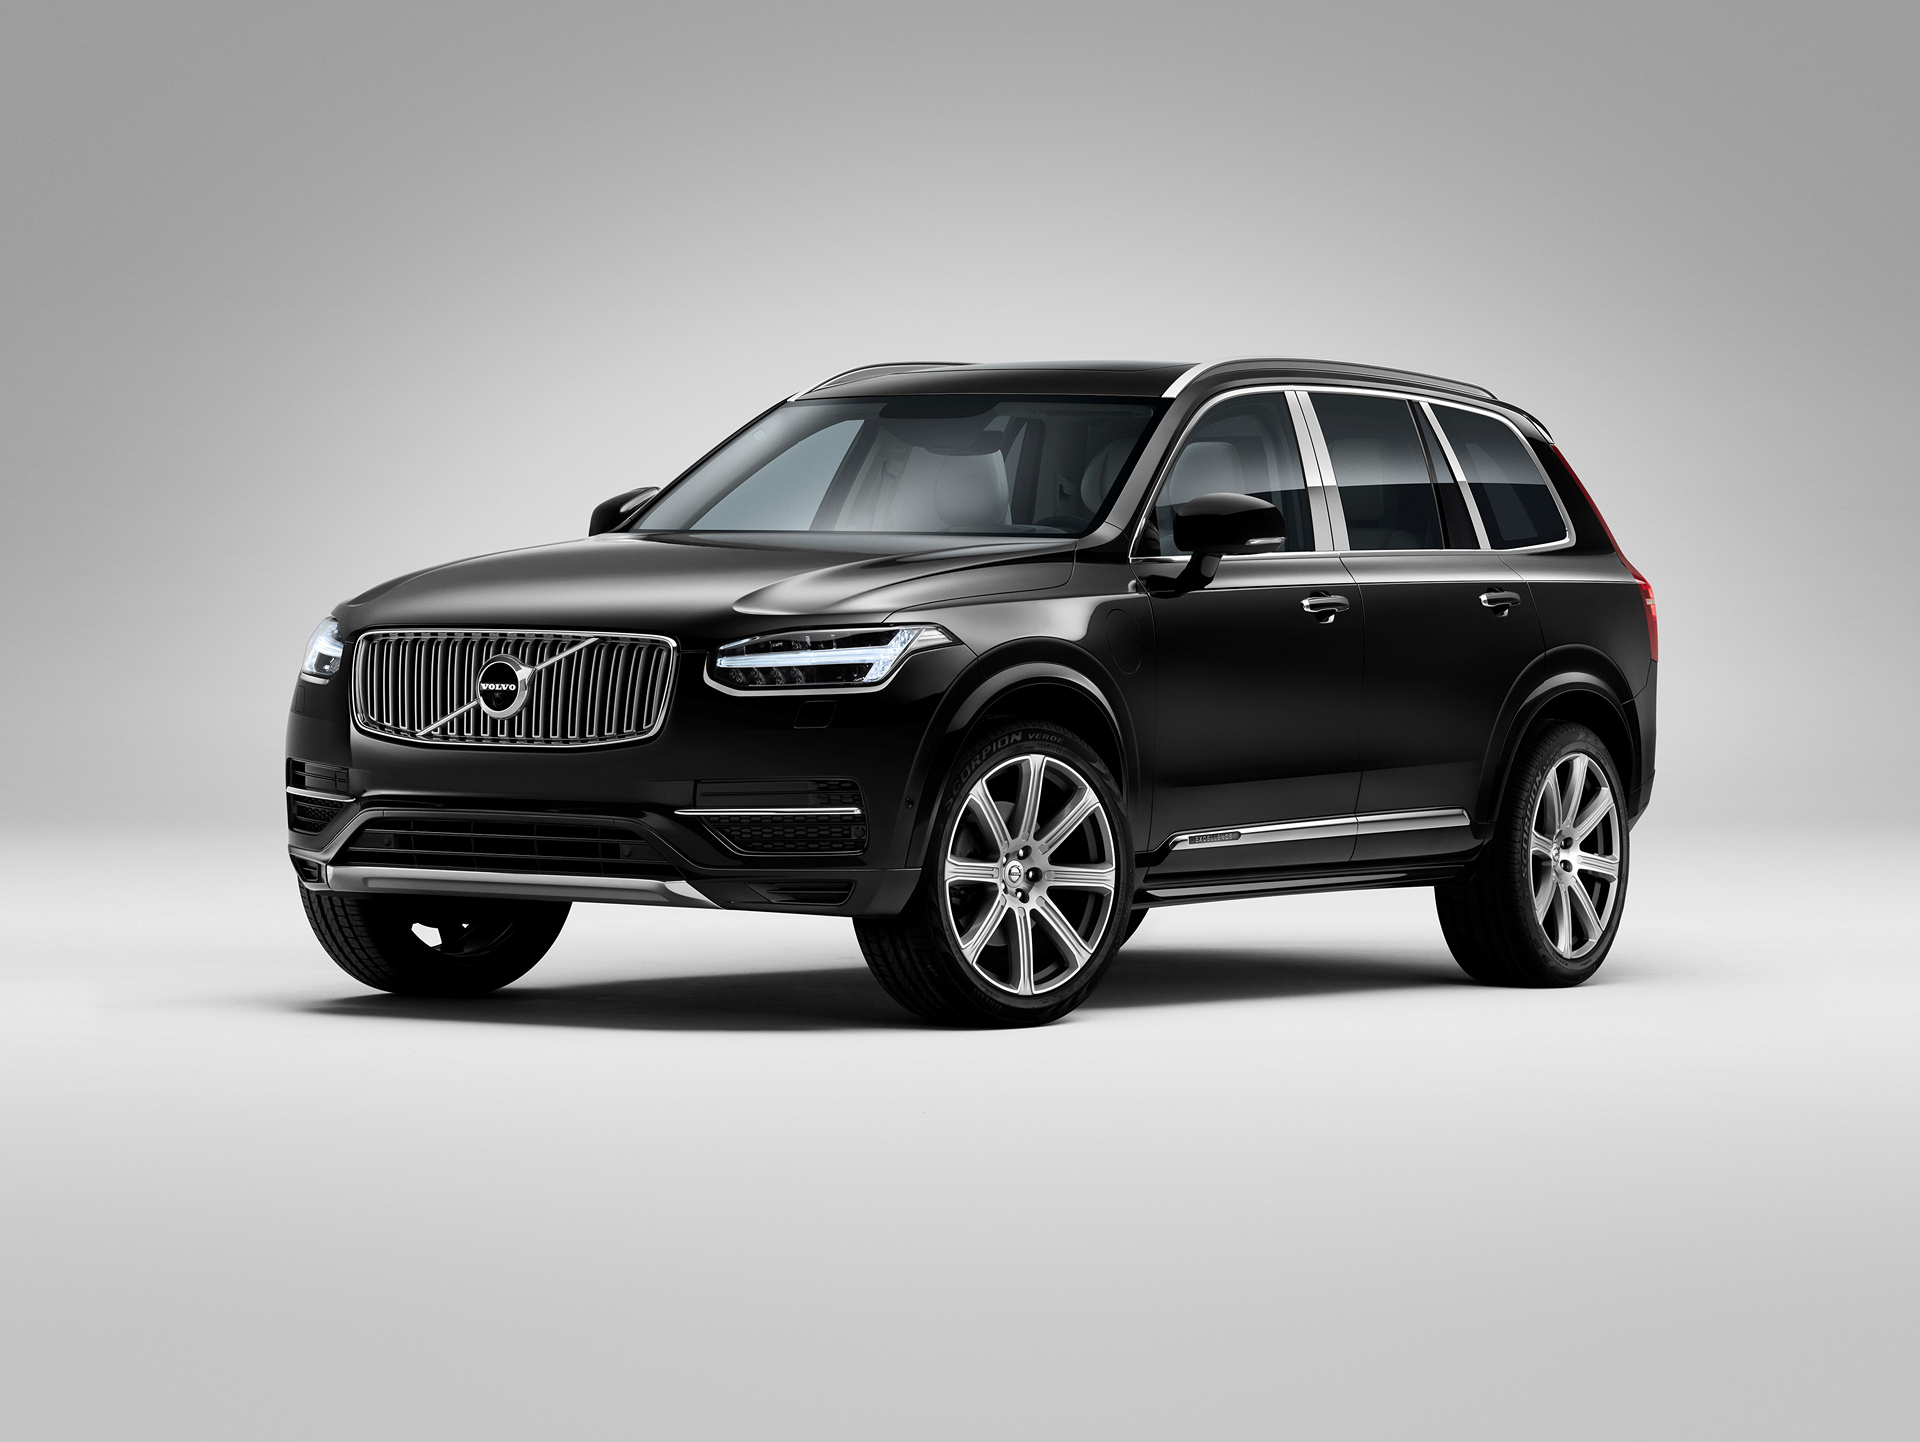 Volvo XC90 Excellence © Zhejiang Geely Holding Group Co., Ltd